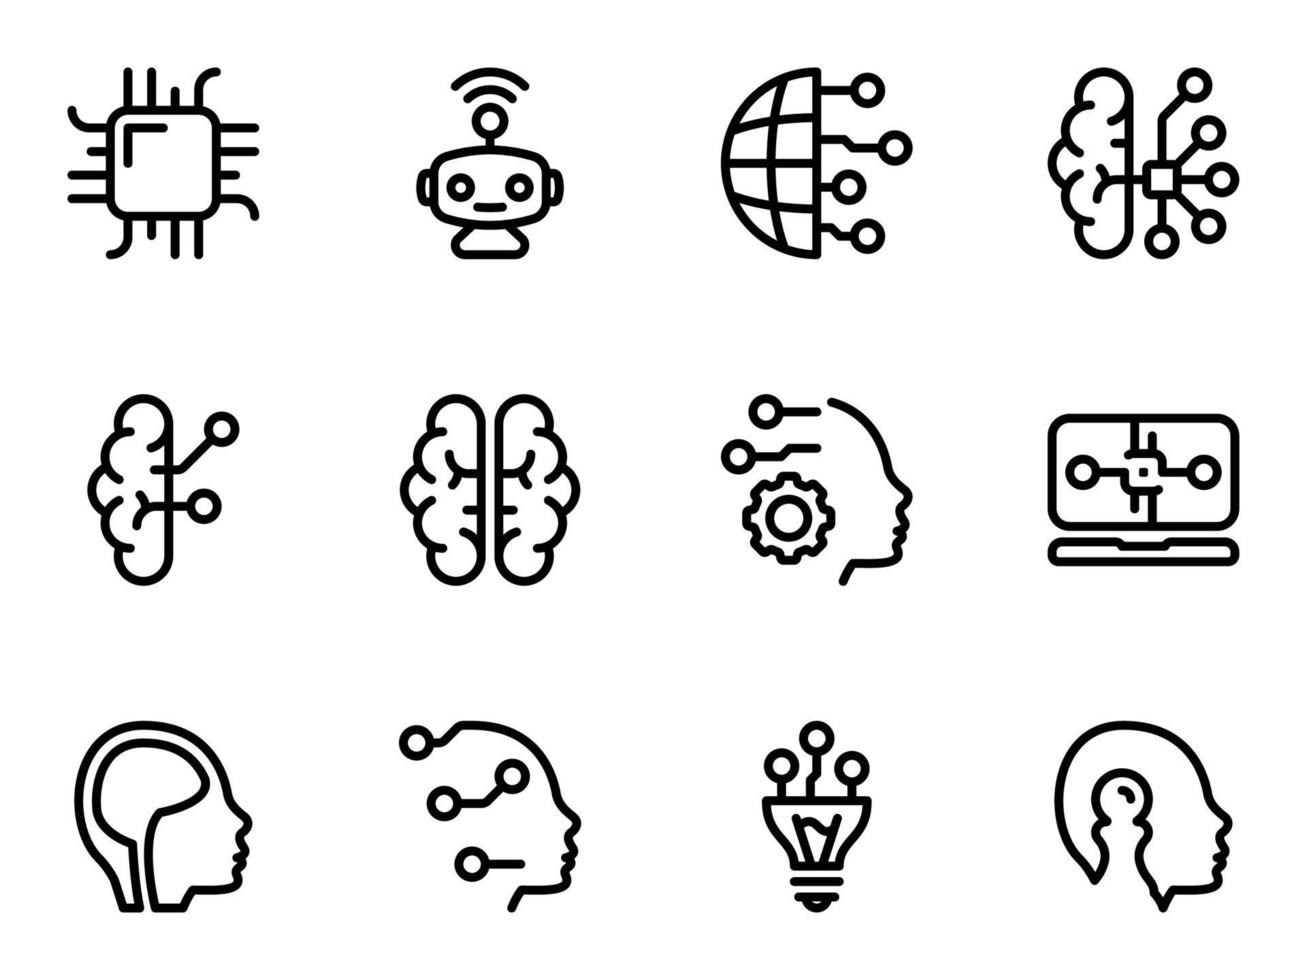 Set of black vector icons, isolated against white background. Flat illustration on a theme Artificial intelligence, integration with the human brain. Line, outline, stroke